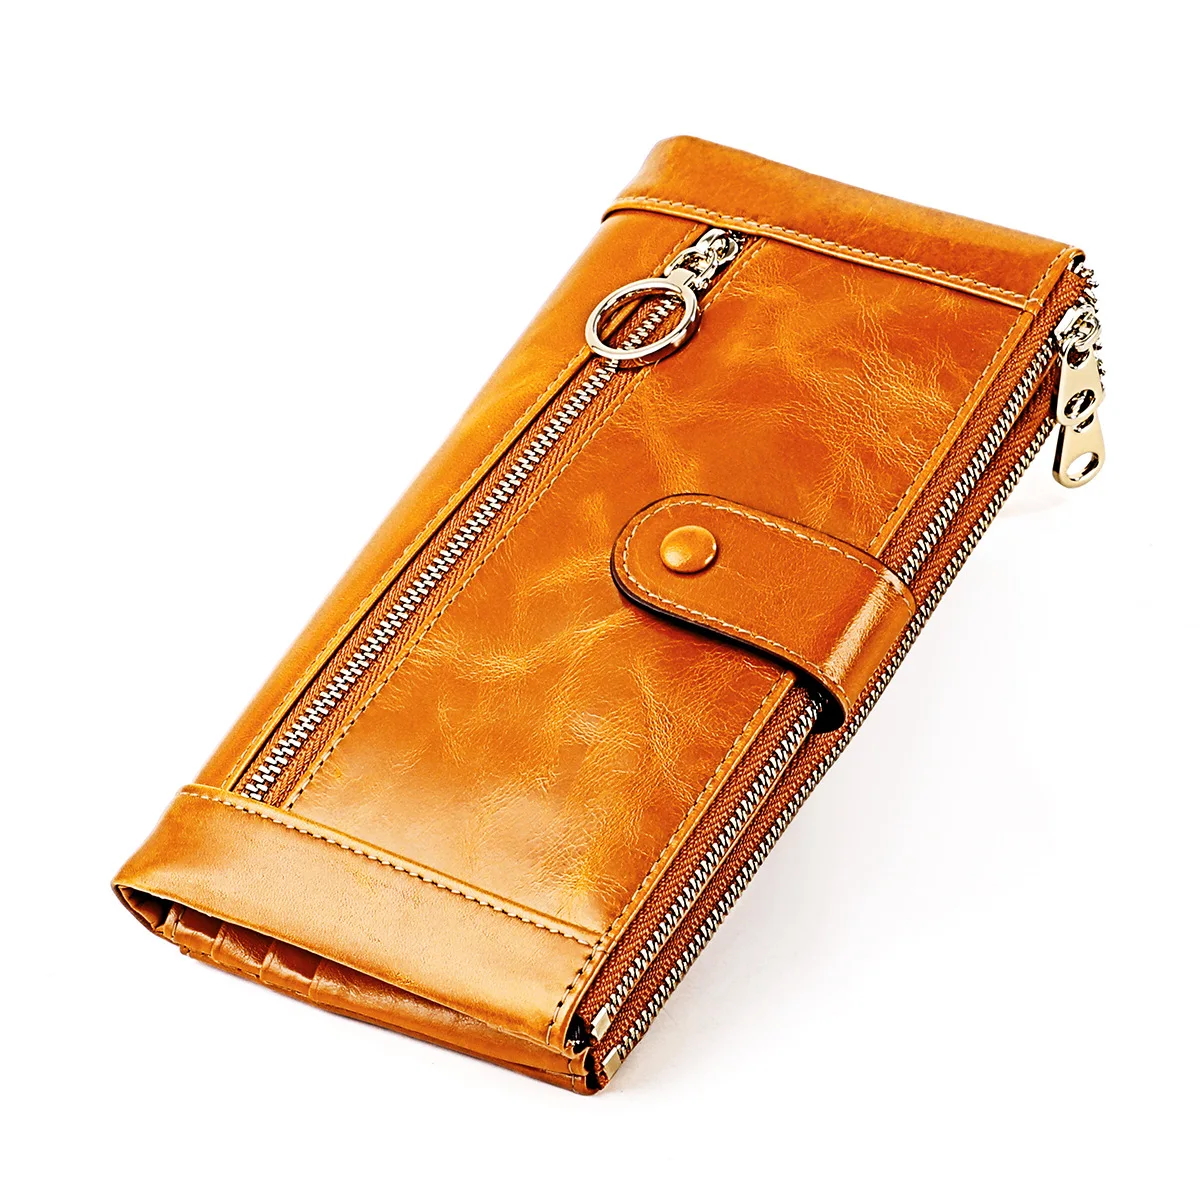 RFID Women Wallet Fashion Genuine Leather Wallet Card Holder Female Long Purse Cell Phone Pocket Large Capacity Clutch Wallets